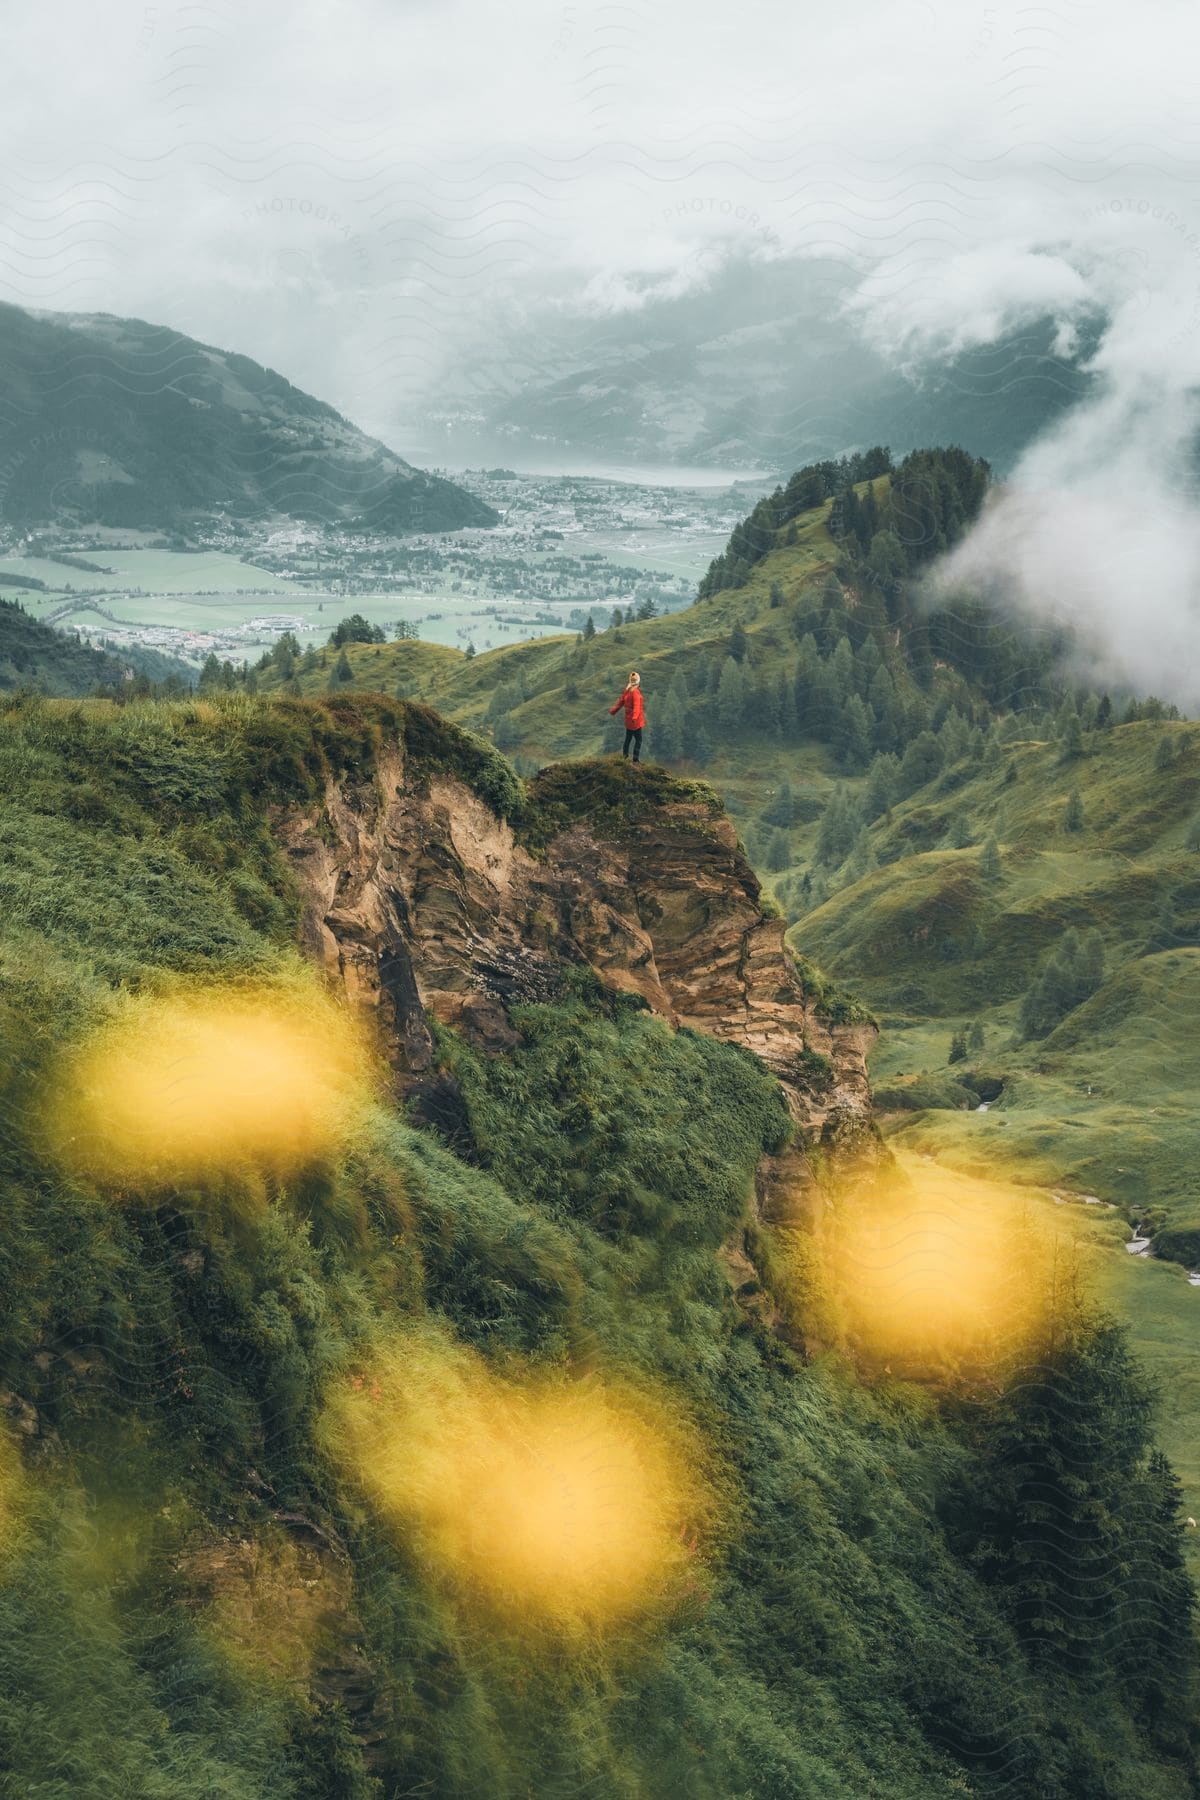 A person is hiking on a mountain landscape